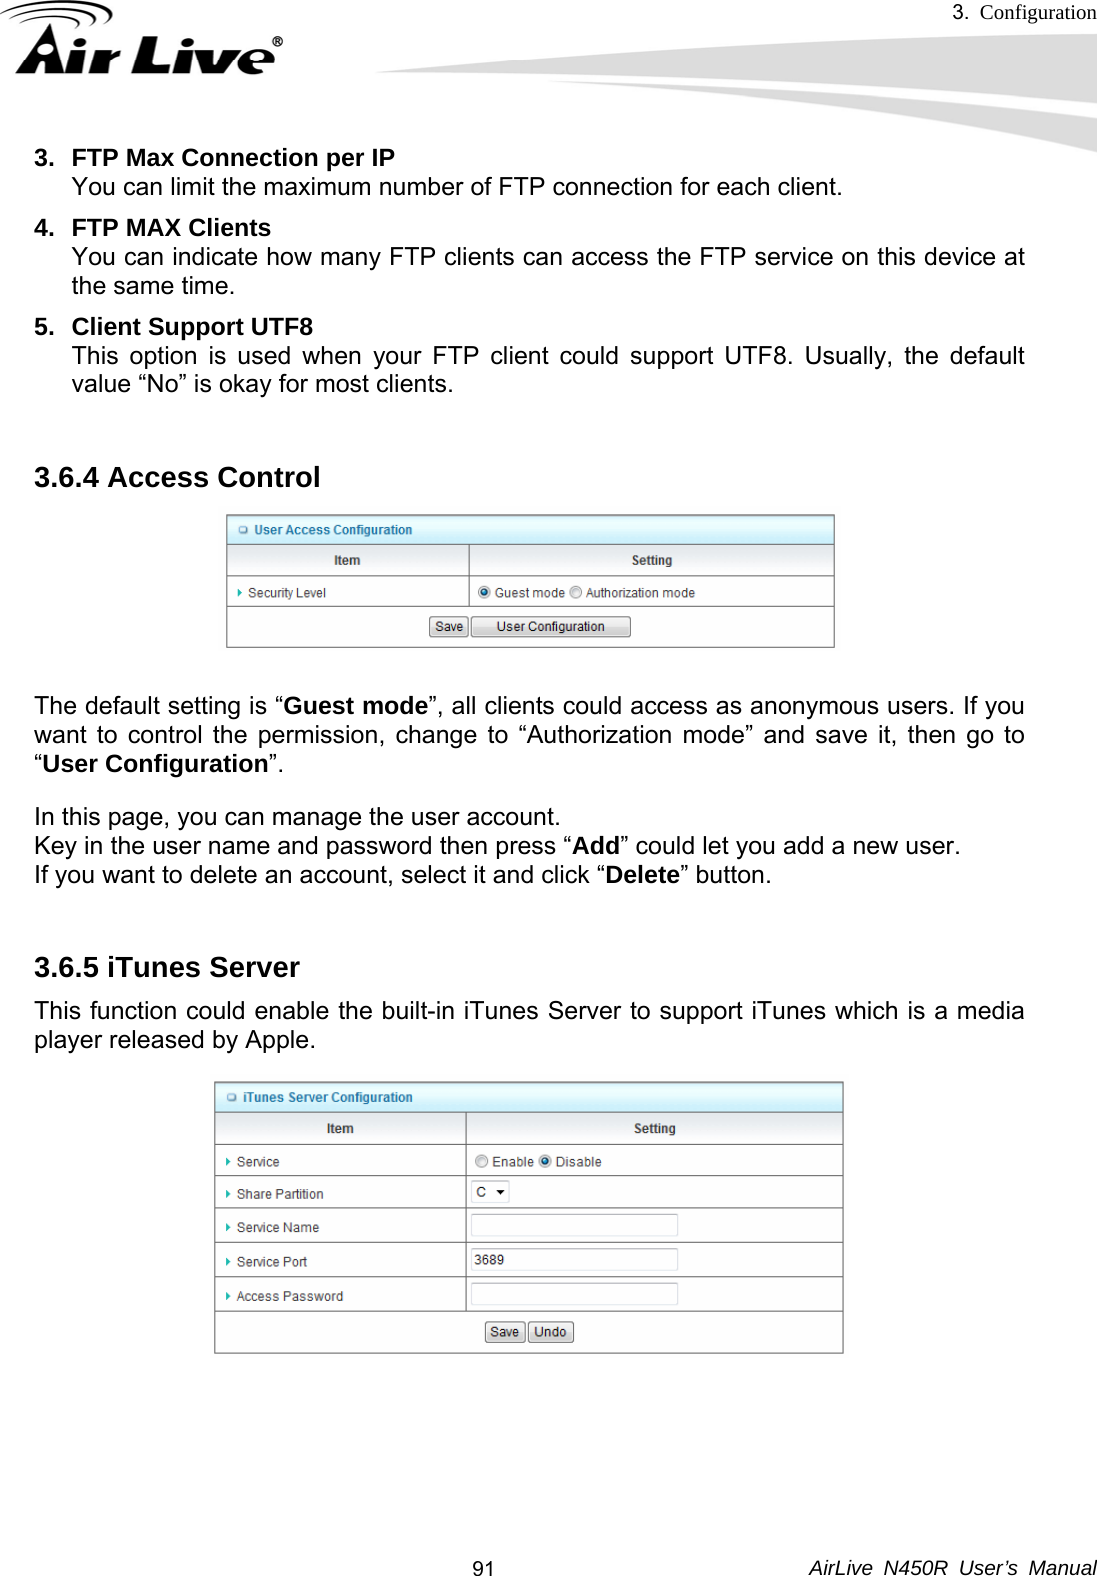 3.  Configuration     AirLive N450R User’s Manual  913.  FTP Max Connection per IP You can limit the maximum number of FTP connection for each client. 4.  FTP MAX Clients You can indicate how many FTP clients can access the FTP service on this device at the same time.   5.  Client Support UTF8 This option is used when your FTP client could support UTF8. Usually, the default value “No” is okay for most clients.  3.6.4 Access Control    The default setting is “Guest mode”, all clients could access as anonymous users. If you want to control the permission, change to “Authorization mode” and save it, then go to “User Configuration”. In this page, you can manage the user account.   Key in the user name and password then press “Add” could let you add a new user. If you want to delete an account, select it and click “Delete” button.  3.6.5 iTunes Server   This function could enable the built-in iTunes Server to support iTunes which is a media player released by Apple.     